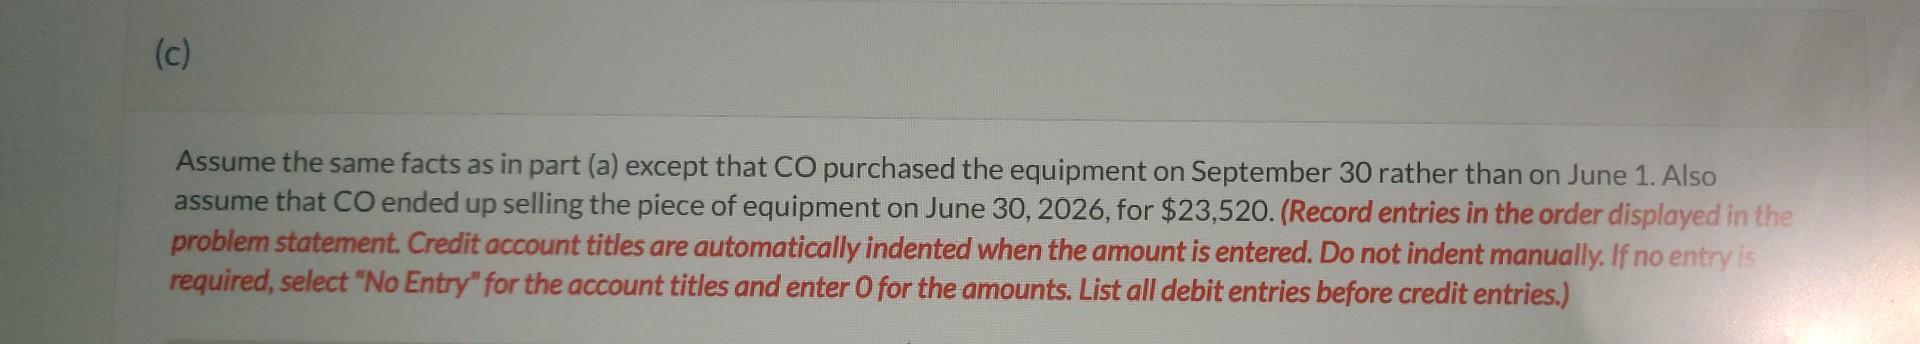 Assume the same facts as in part (a) except that CO purchased the equipment on September 30 rather than on June 1. Also assum